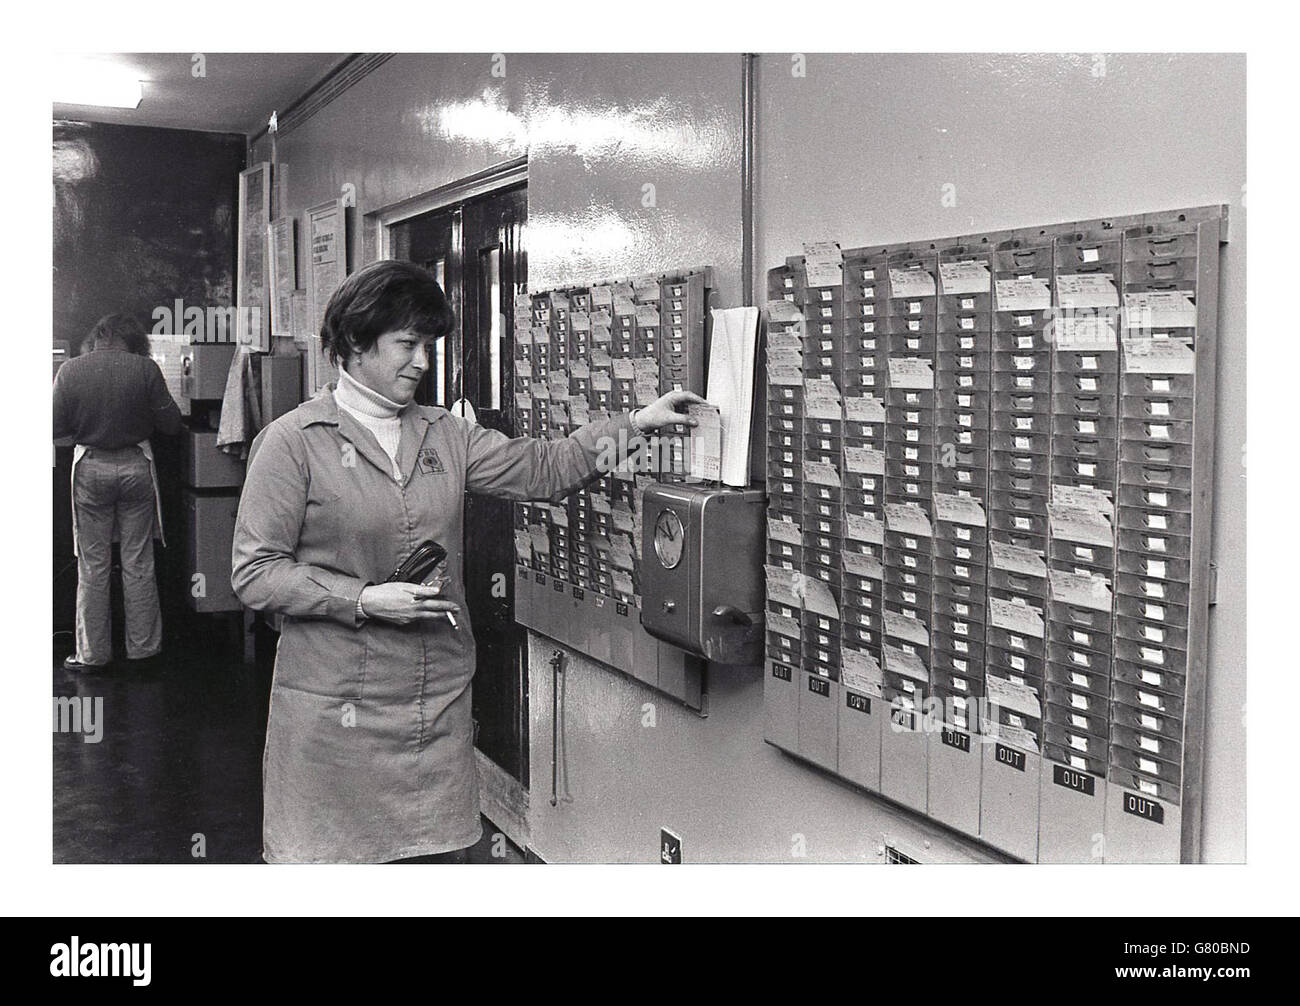 1970s, historical, picture shows a female clocking in at work by putting her employee card in the time clock or punch clock. Stock Photo